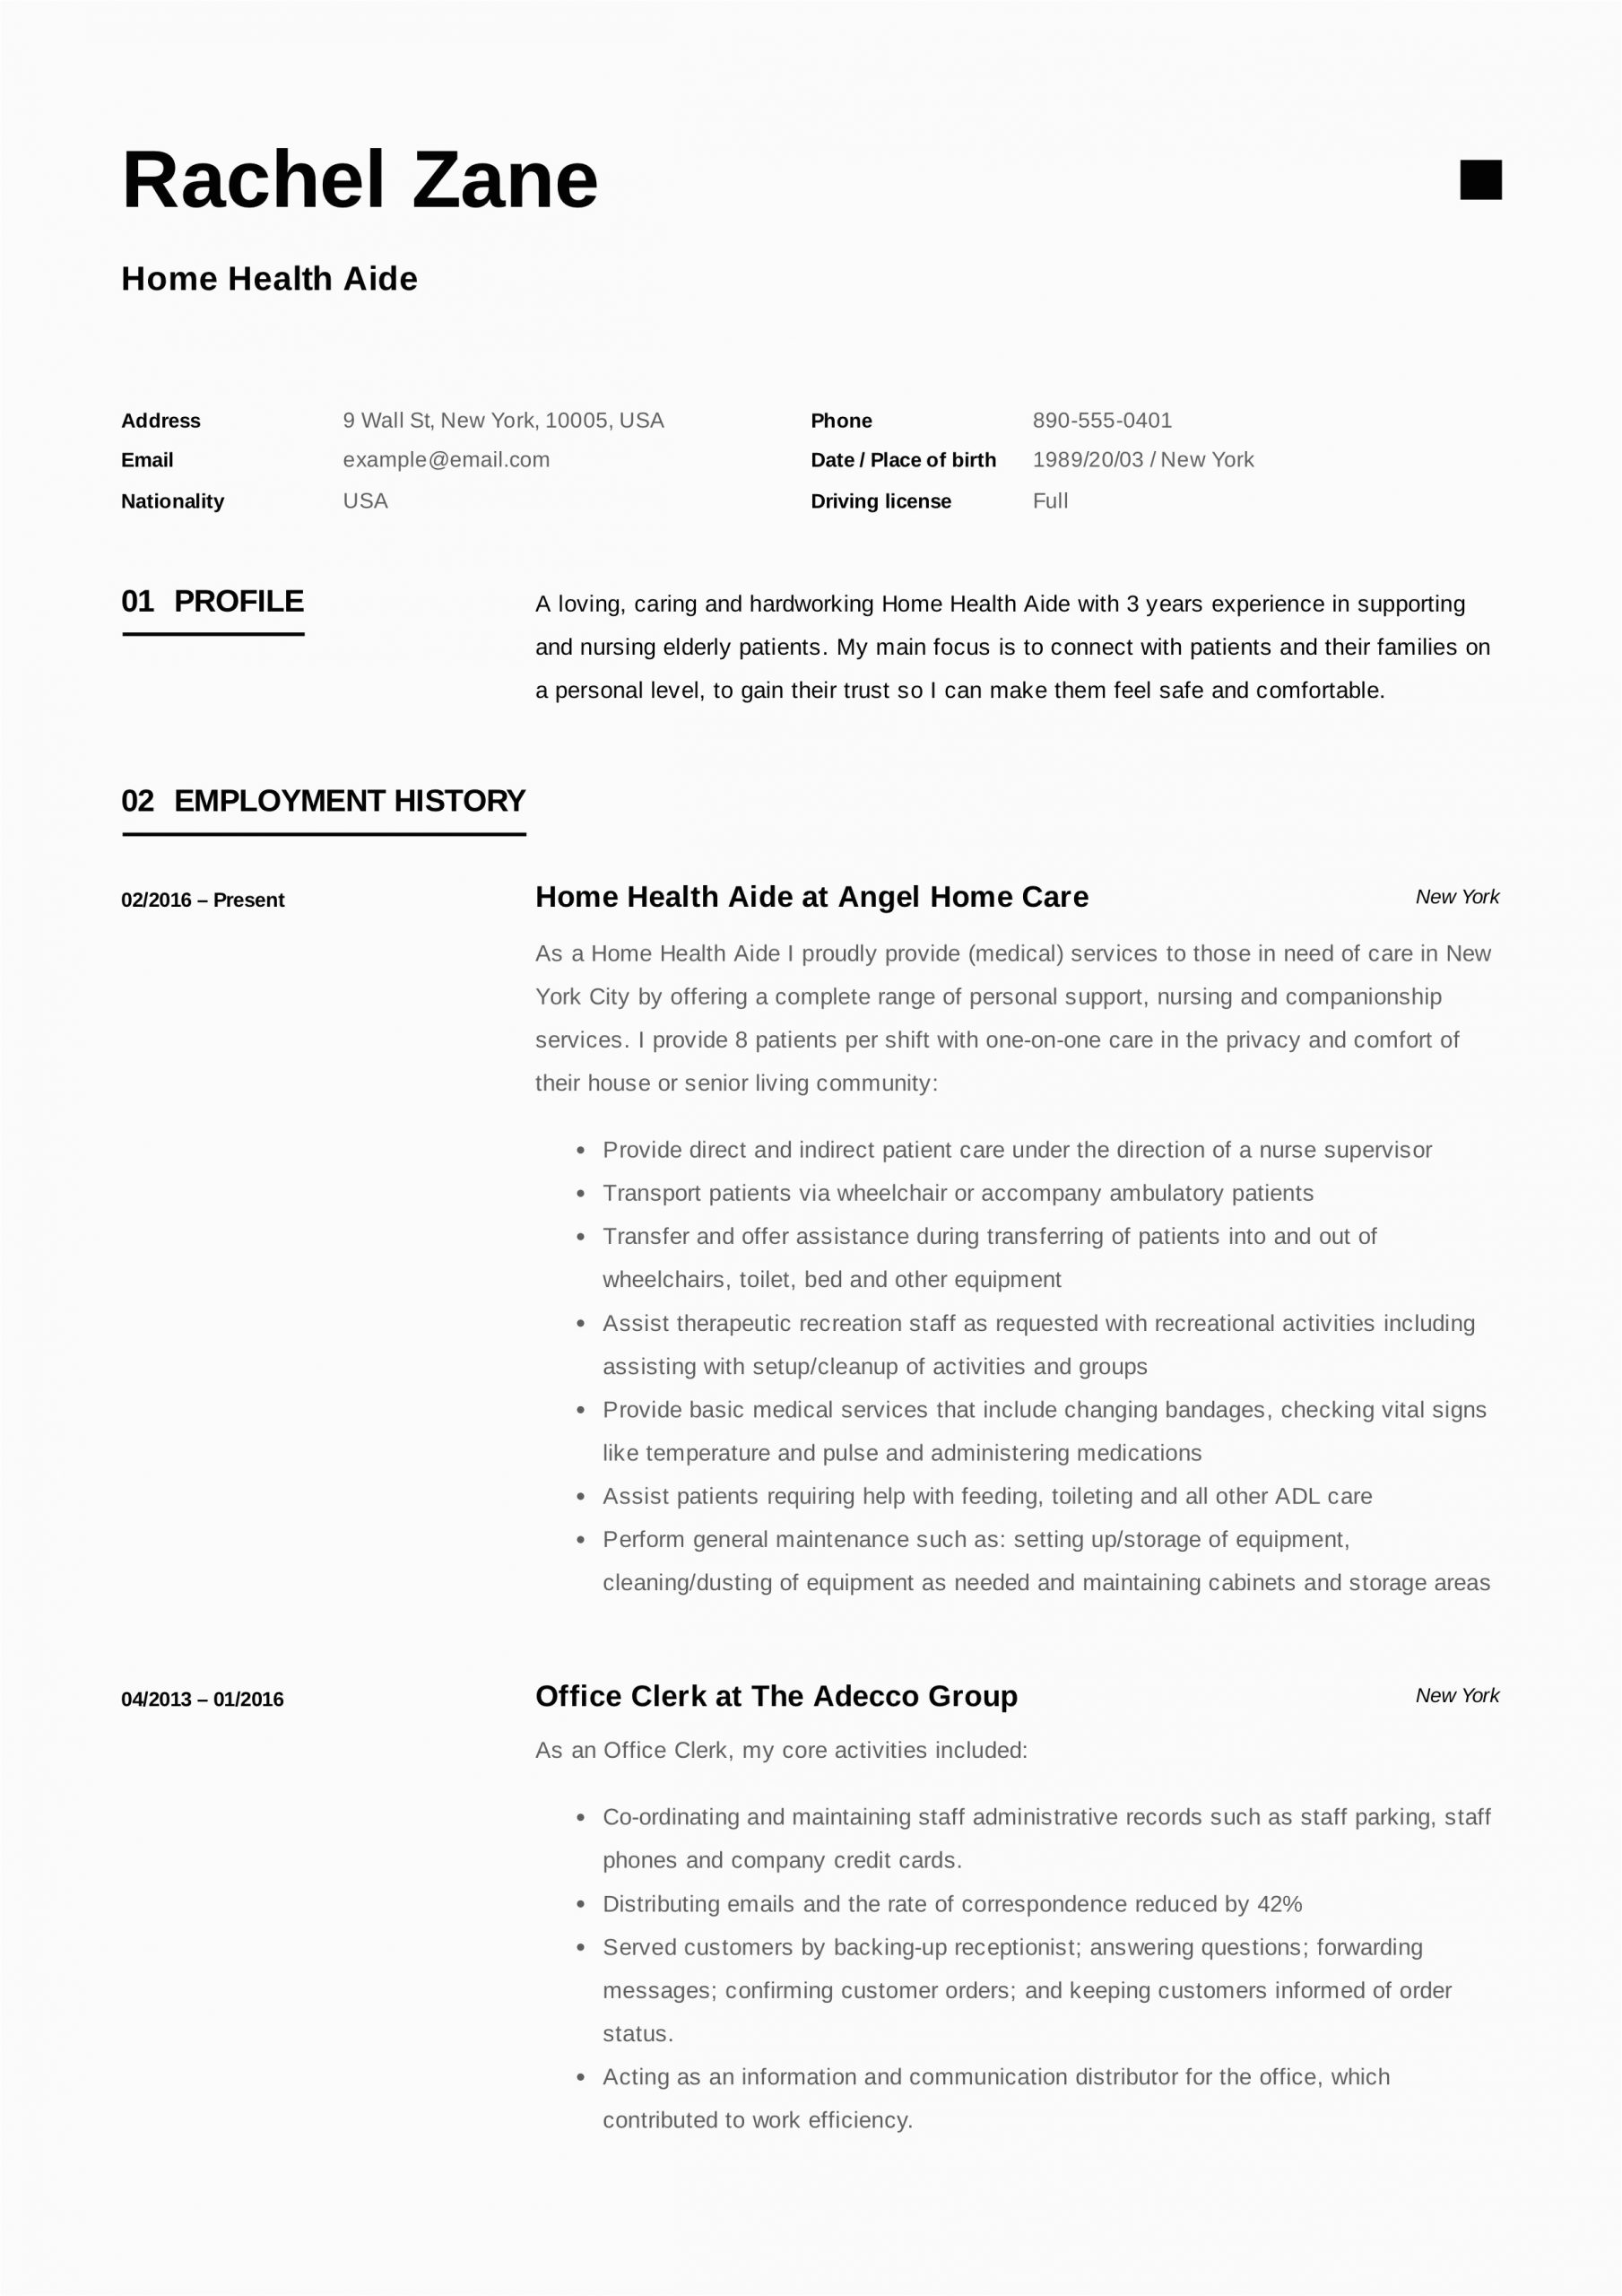 Sample Resume for Health Care Aide Job Home Health Aide Resume Sample & Writing Guide